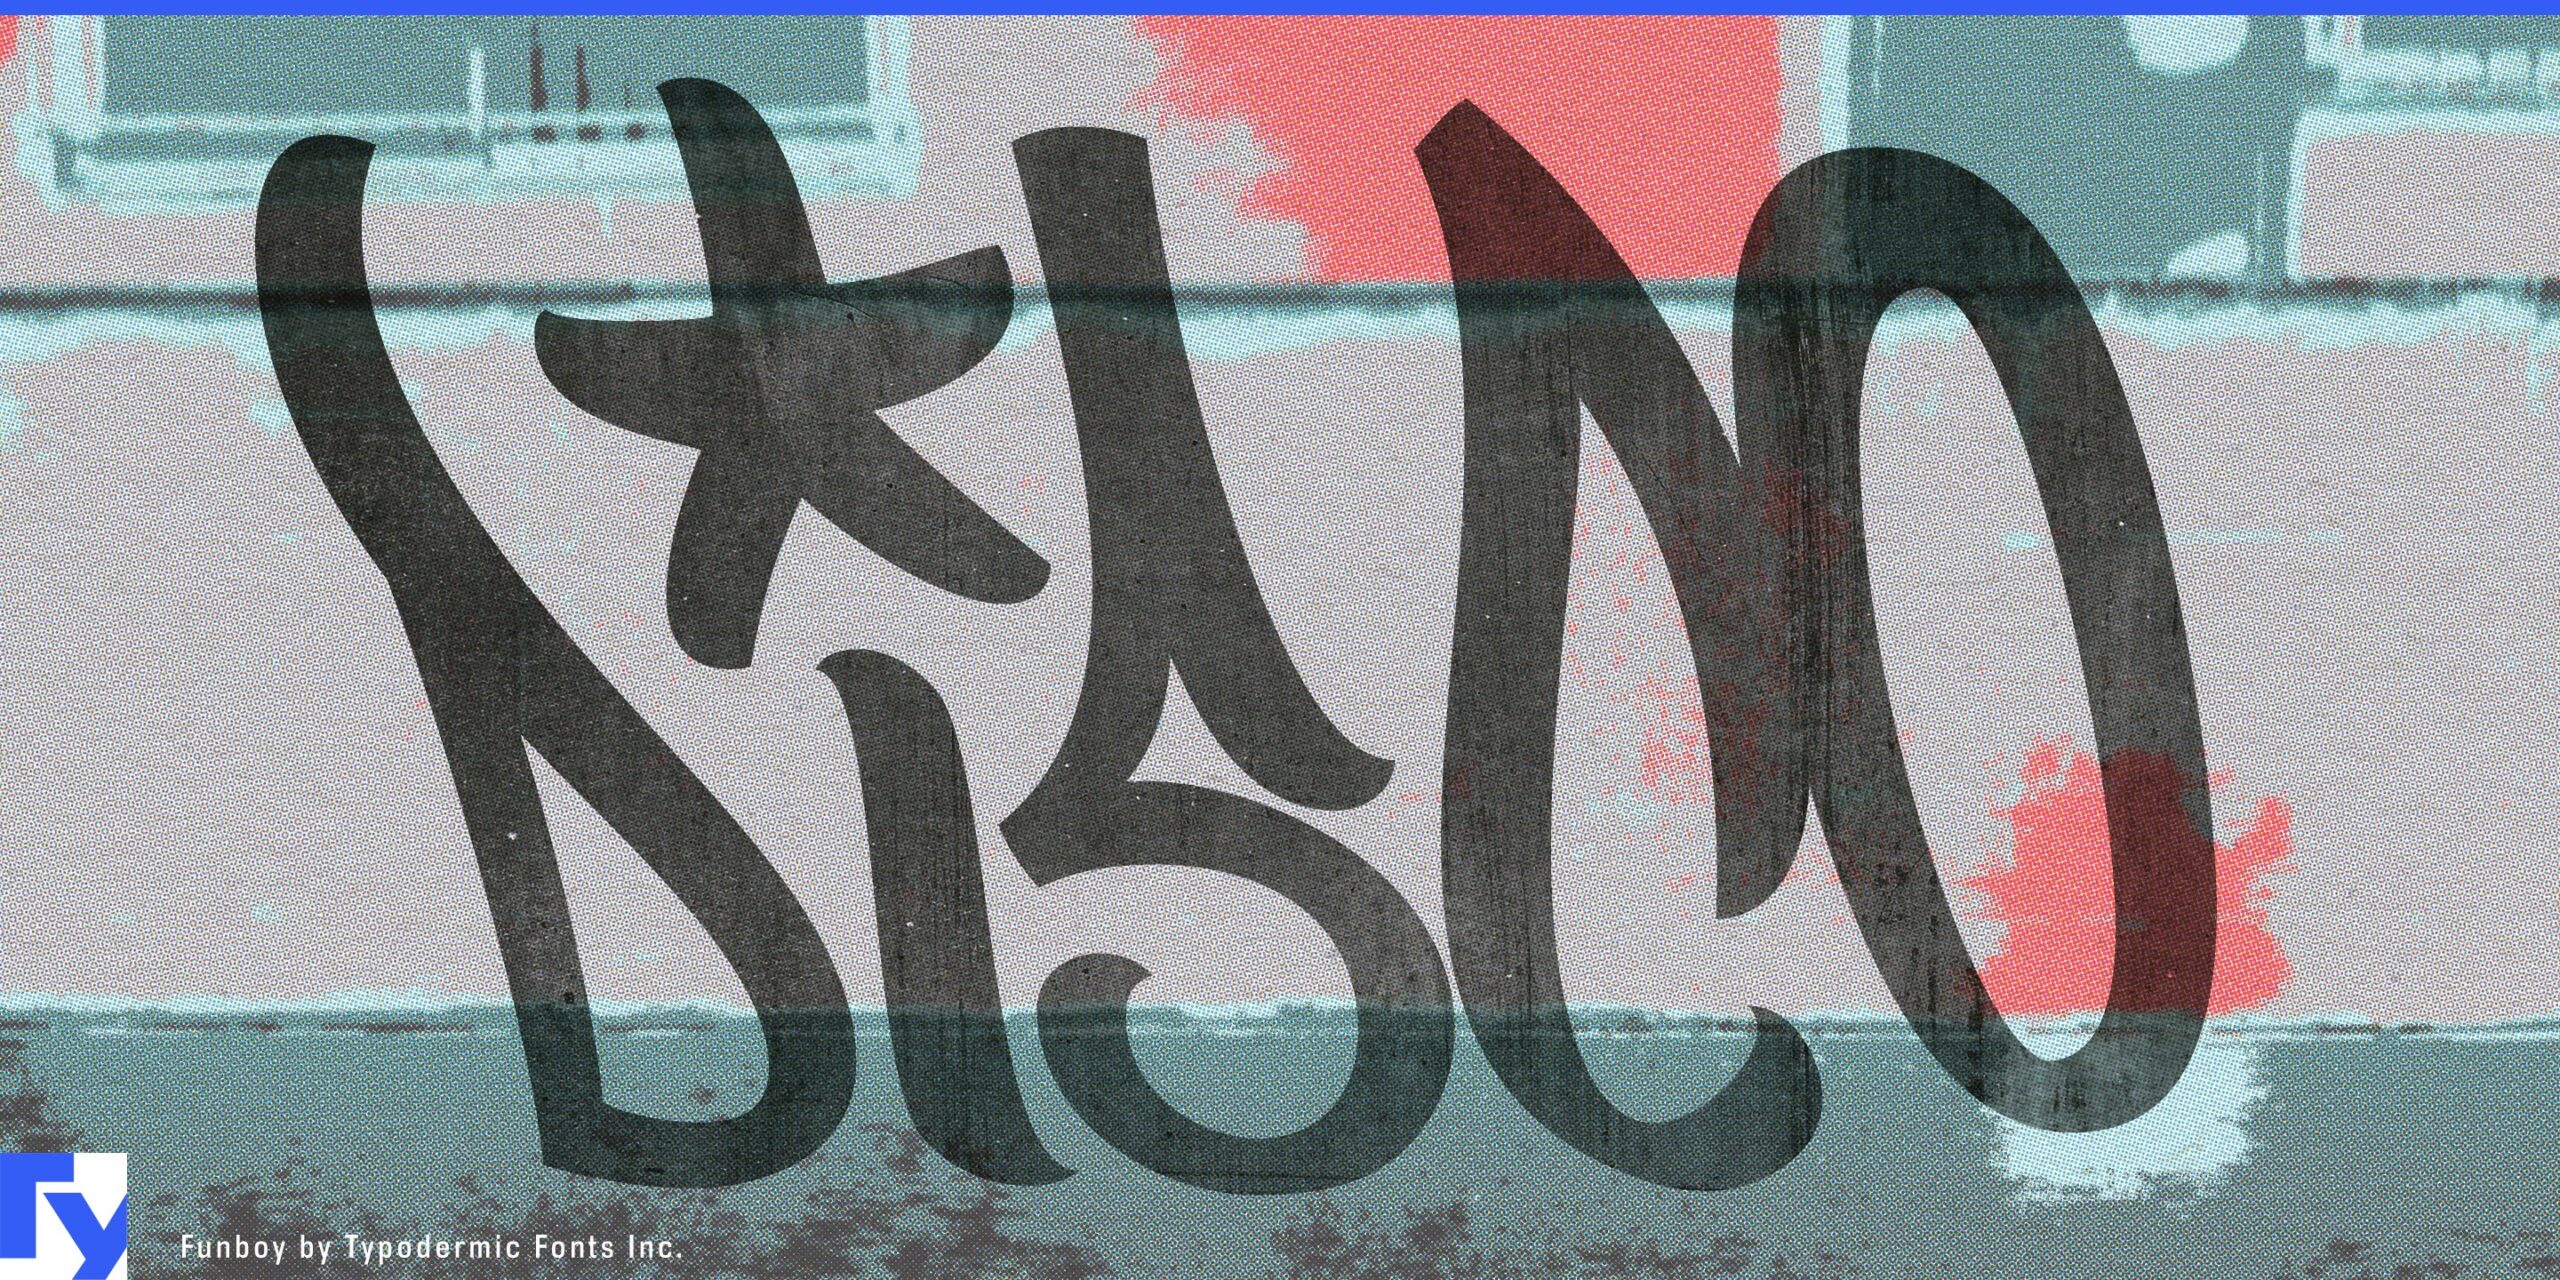 Bold and Edgy: Funboy Typeface Showcasing Its Wild Style